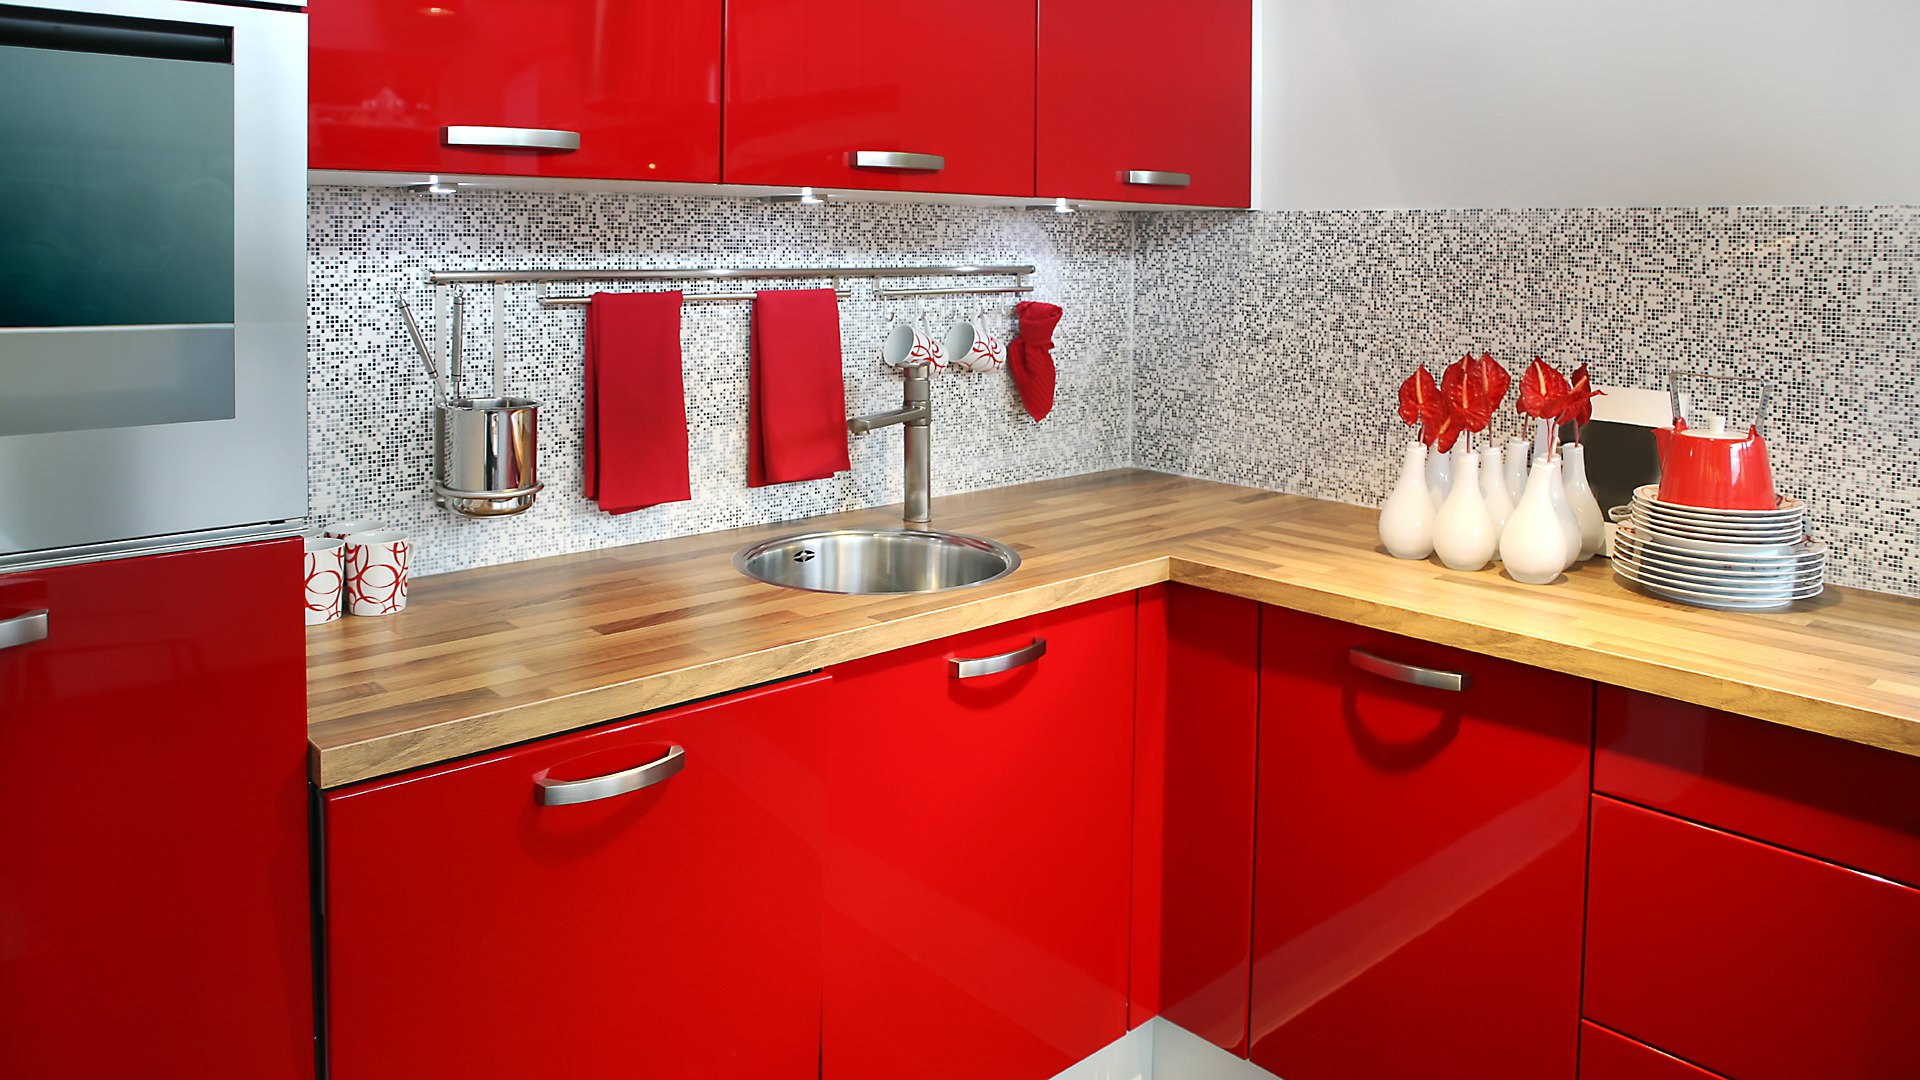 https://st.hzcdn.com/simgs/pictures/kitchens/bright-red-cabinets-added-to-home-renovation-calicabi-cabinets-and-remodeling-img~12513a220d93d2e4_14-6470-1-d333c8a.jpg